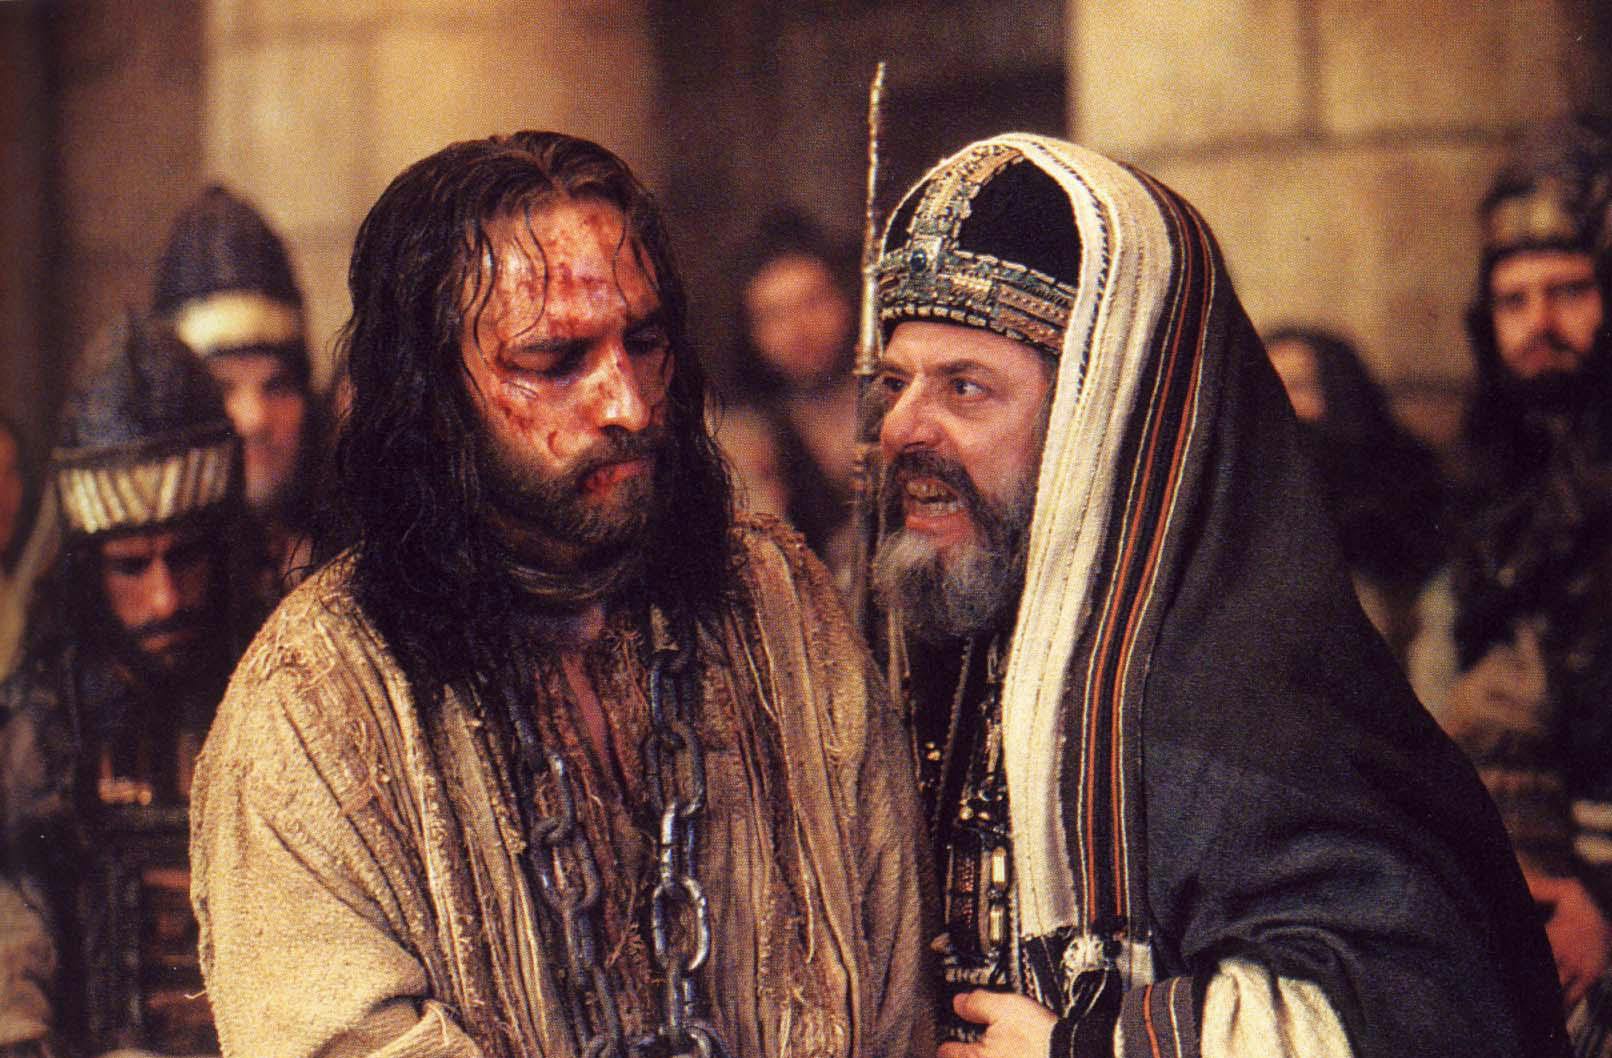 the passion of christ movie online